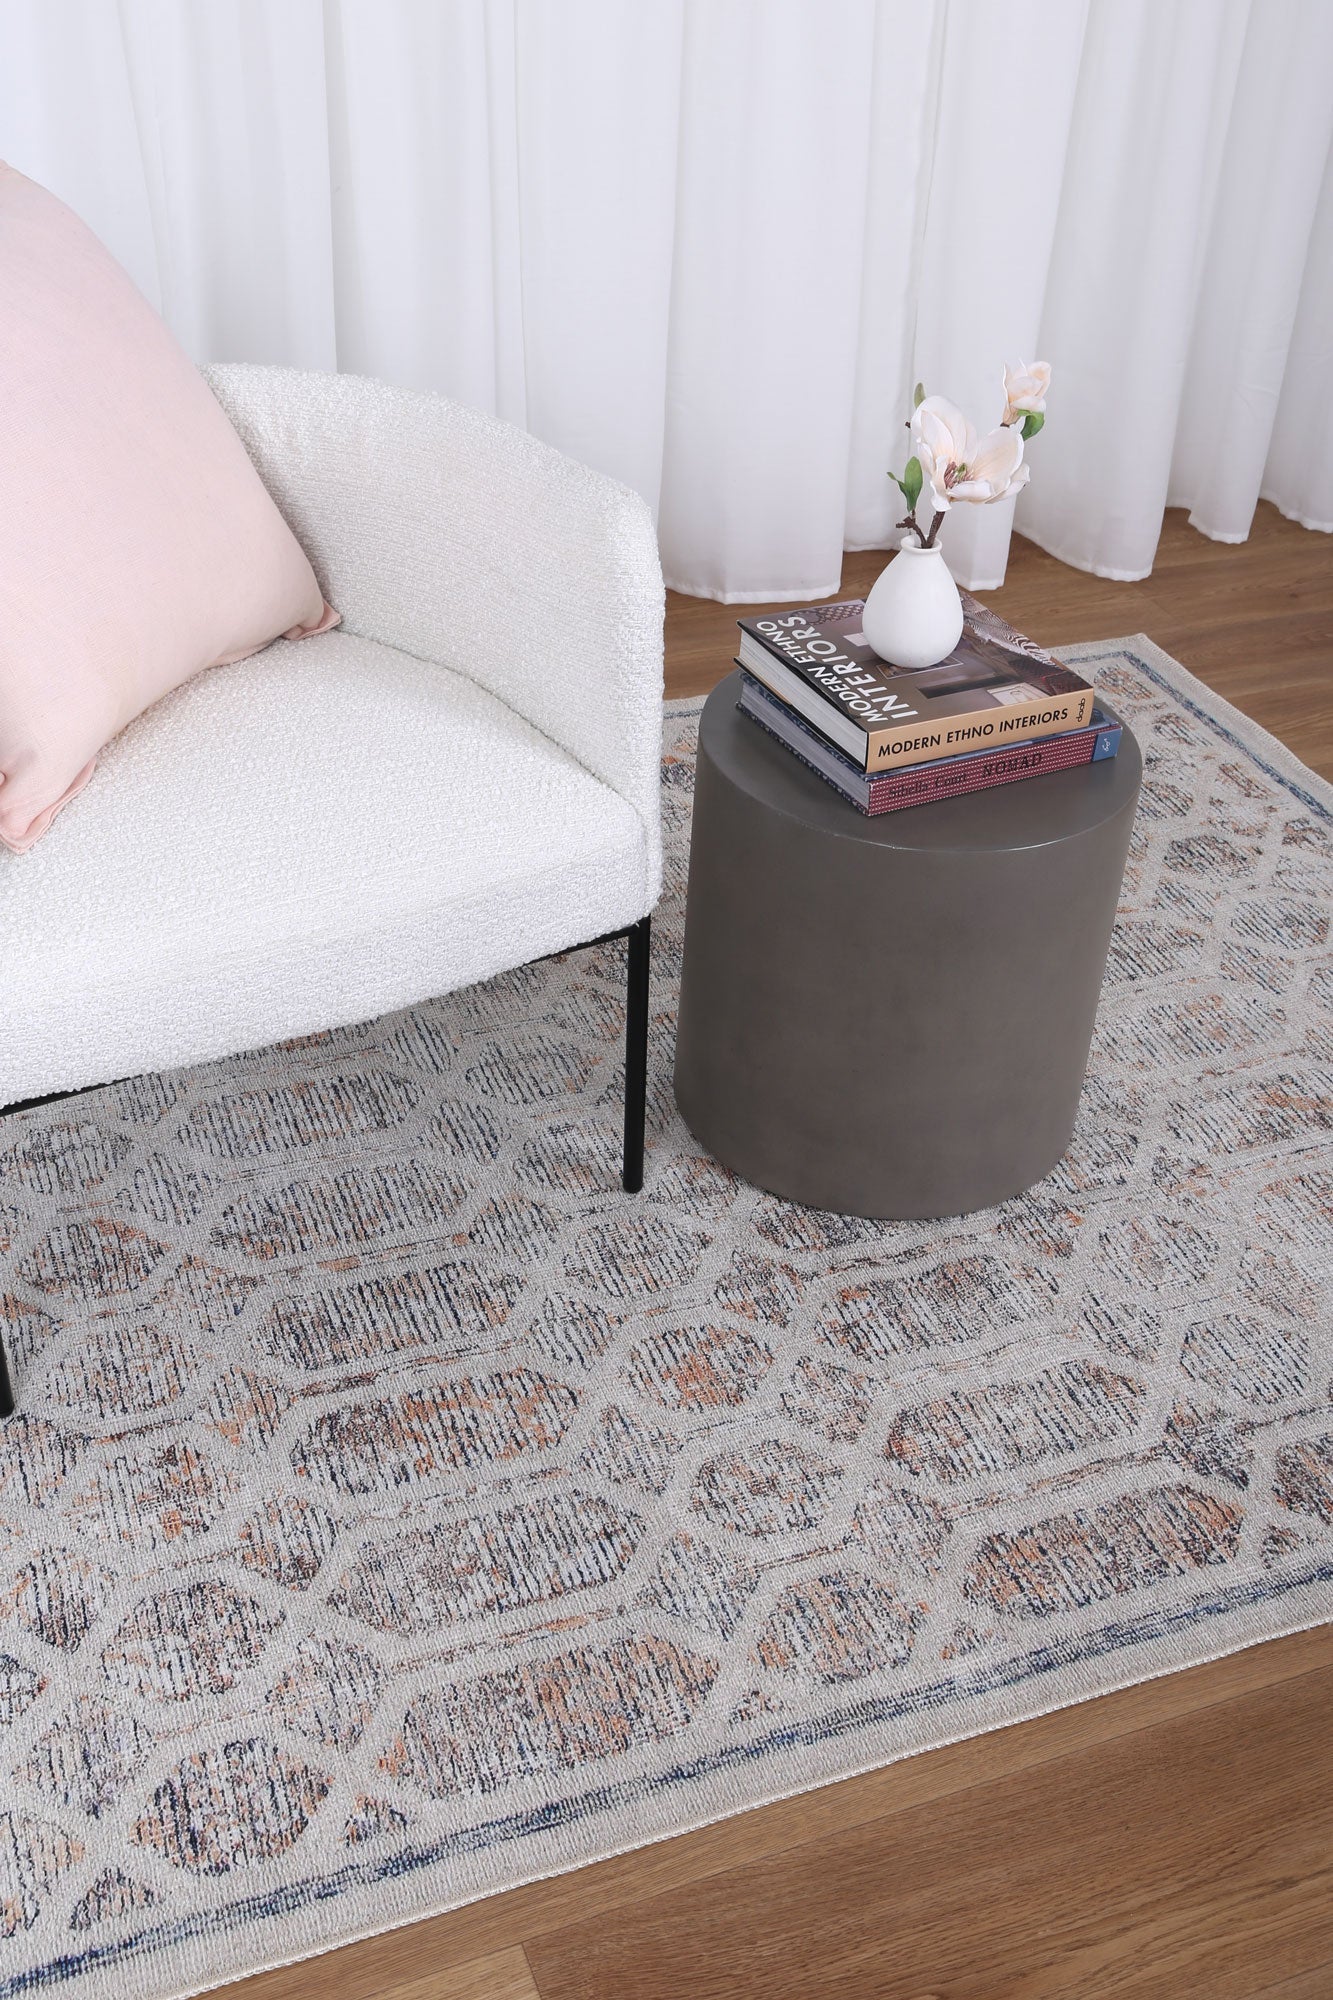 Chantilly Lace Geometric In Multicolour Rug